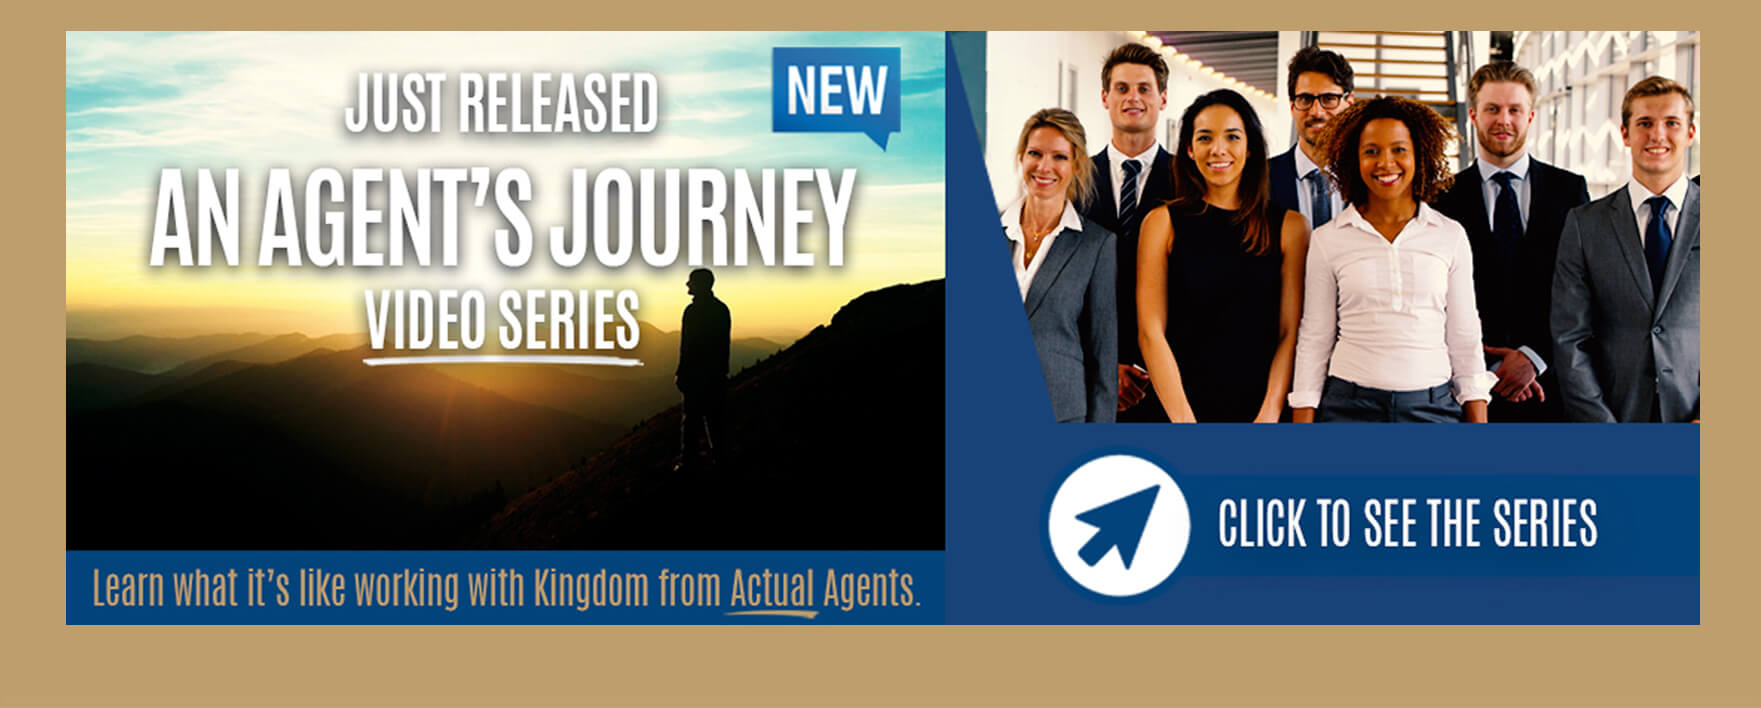 View our Agent's Journey video series!